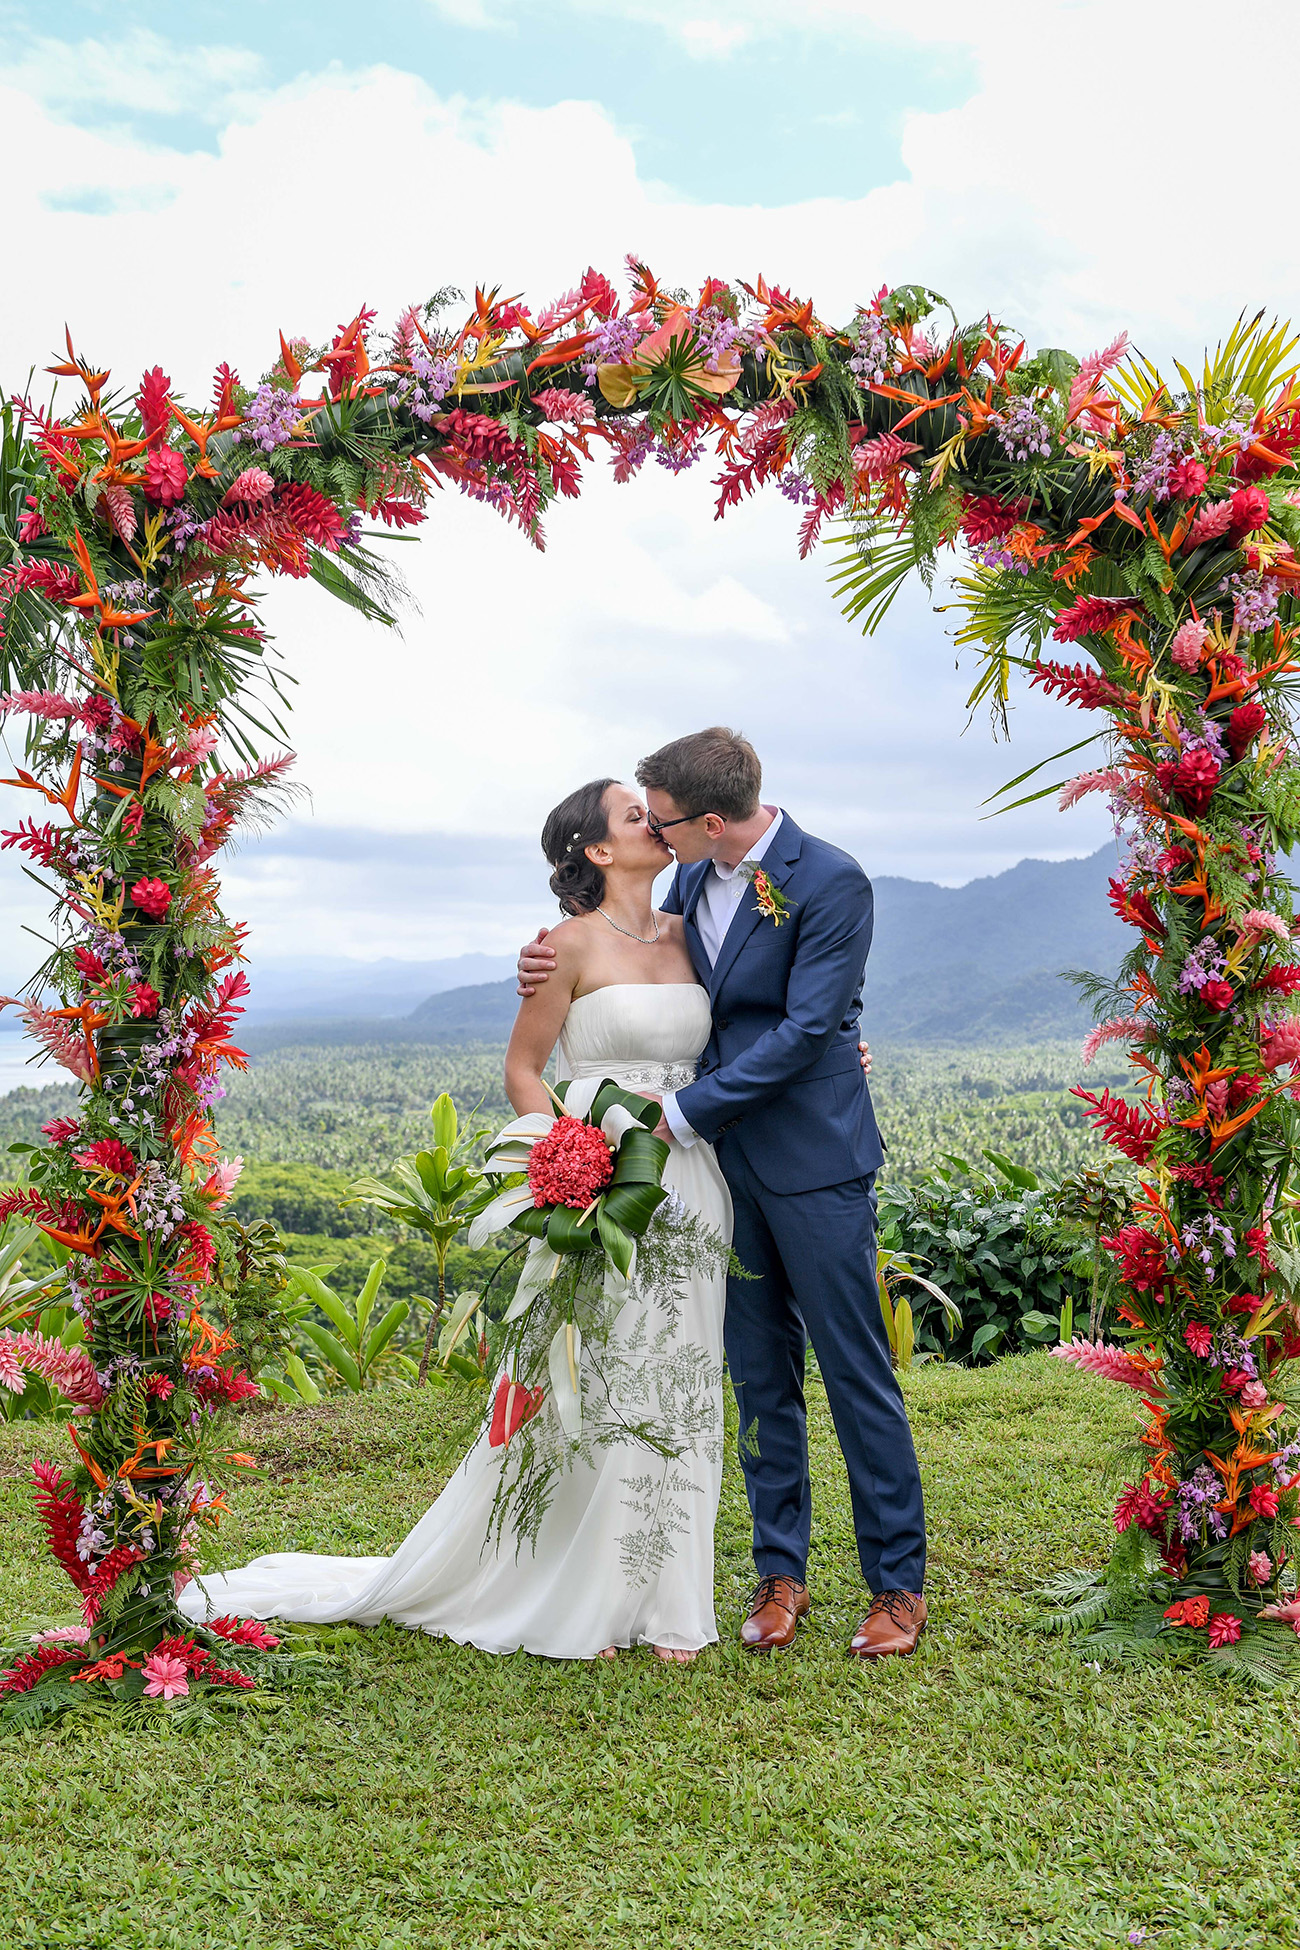 Bride and groom kiss at the altar beneath the floral arc of red and pink flowers at the altar